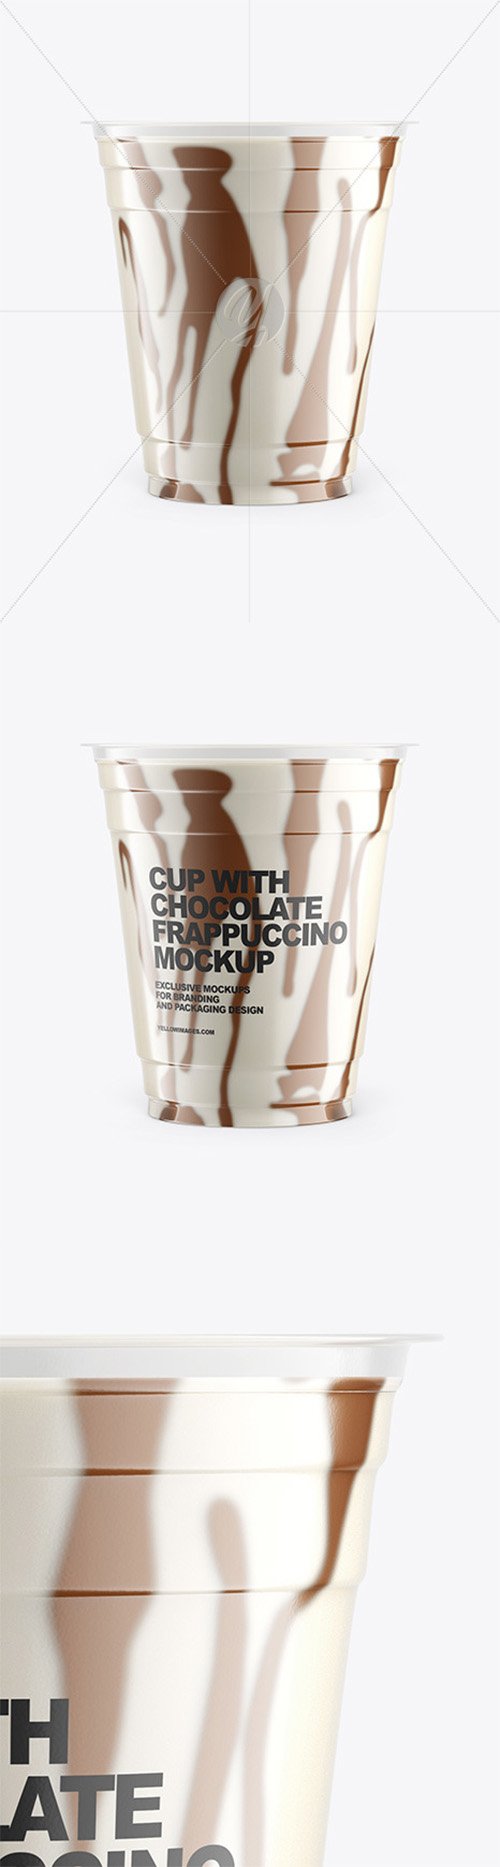 Cup With Chocolate Frappuccino Mockup 67987 TIF